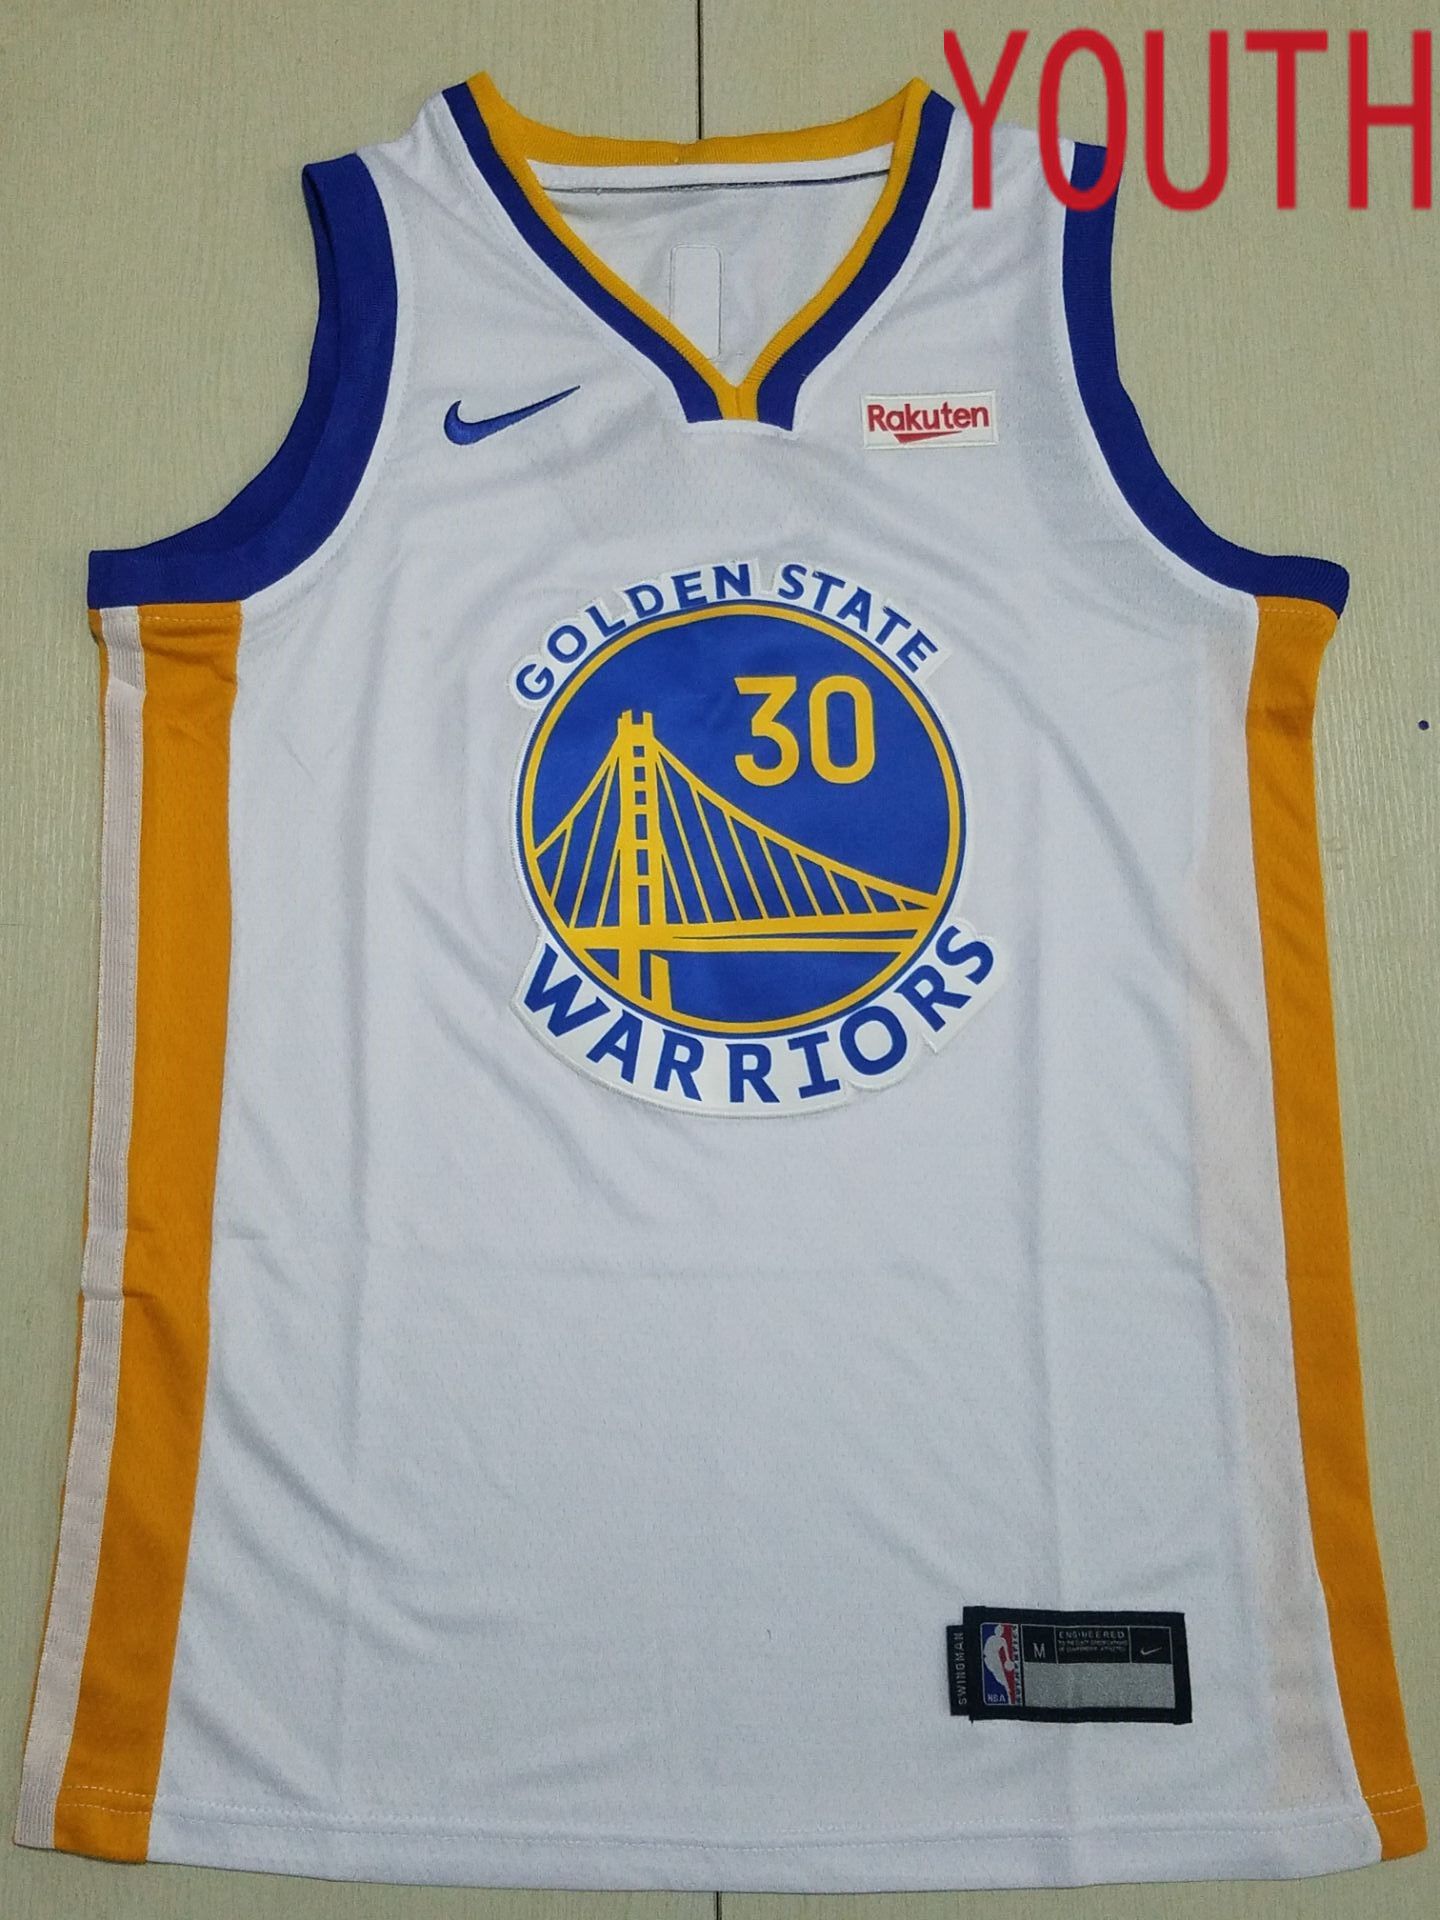 Youth Golden State Warriors #30 Curry White Nike 2022 NBA Jersey->golden state warriors->NBA Jersey